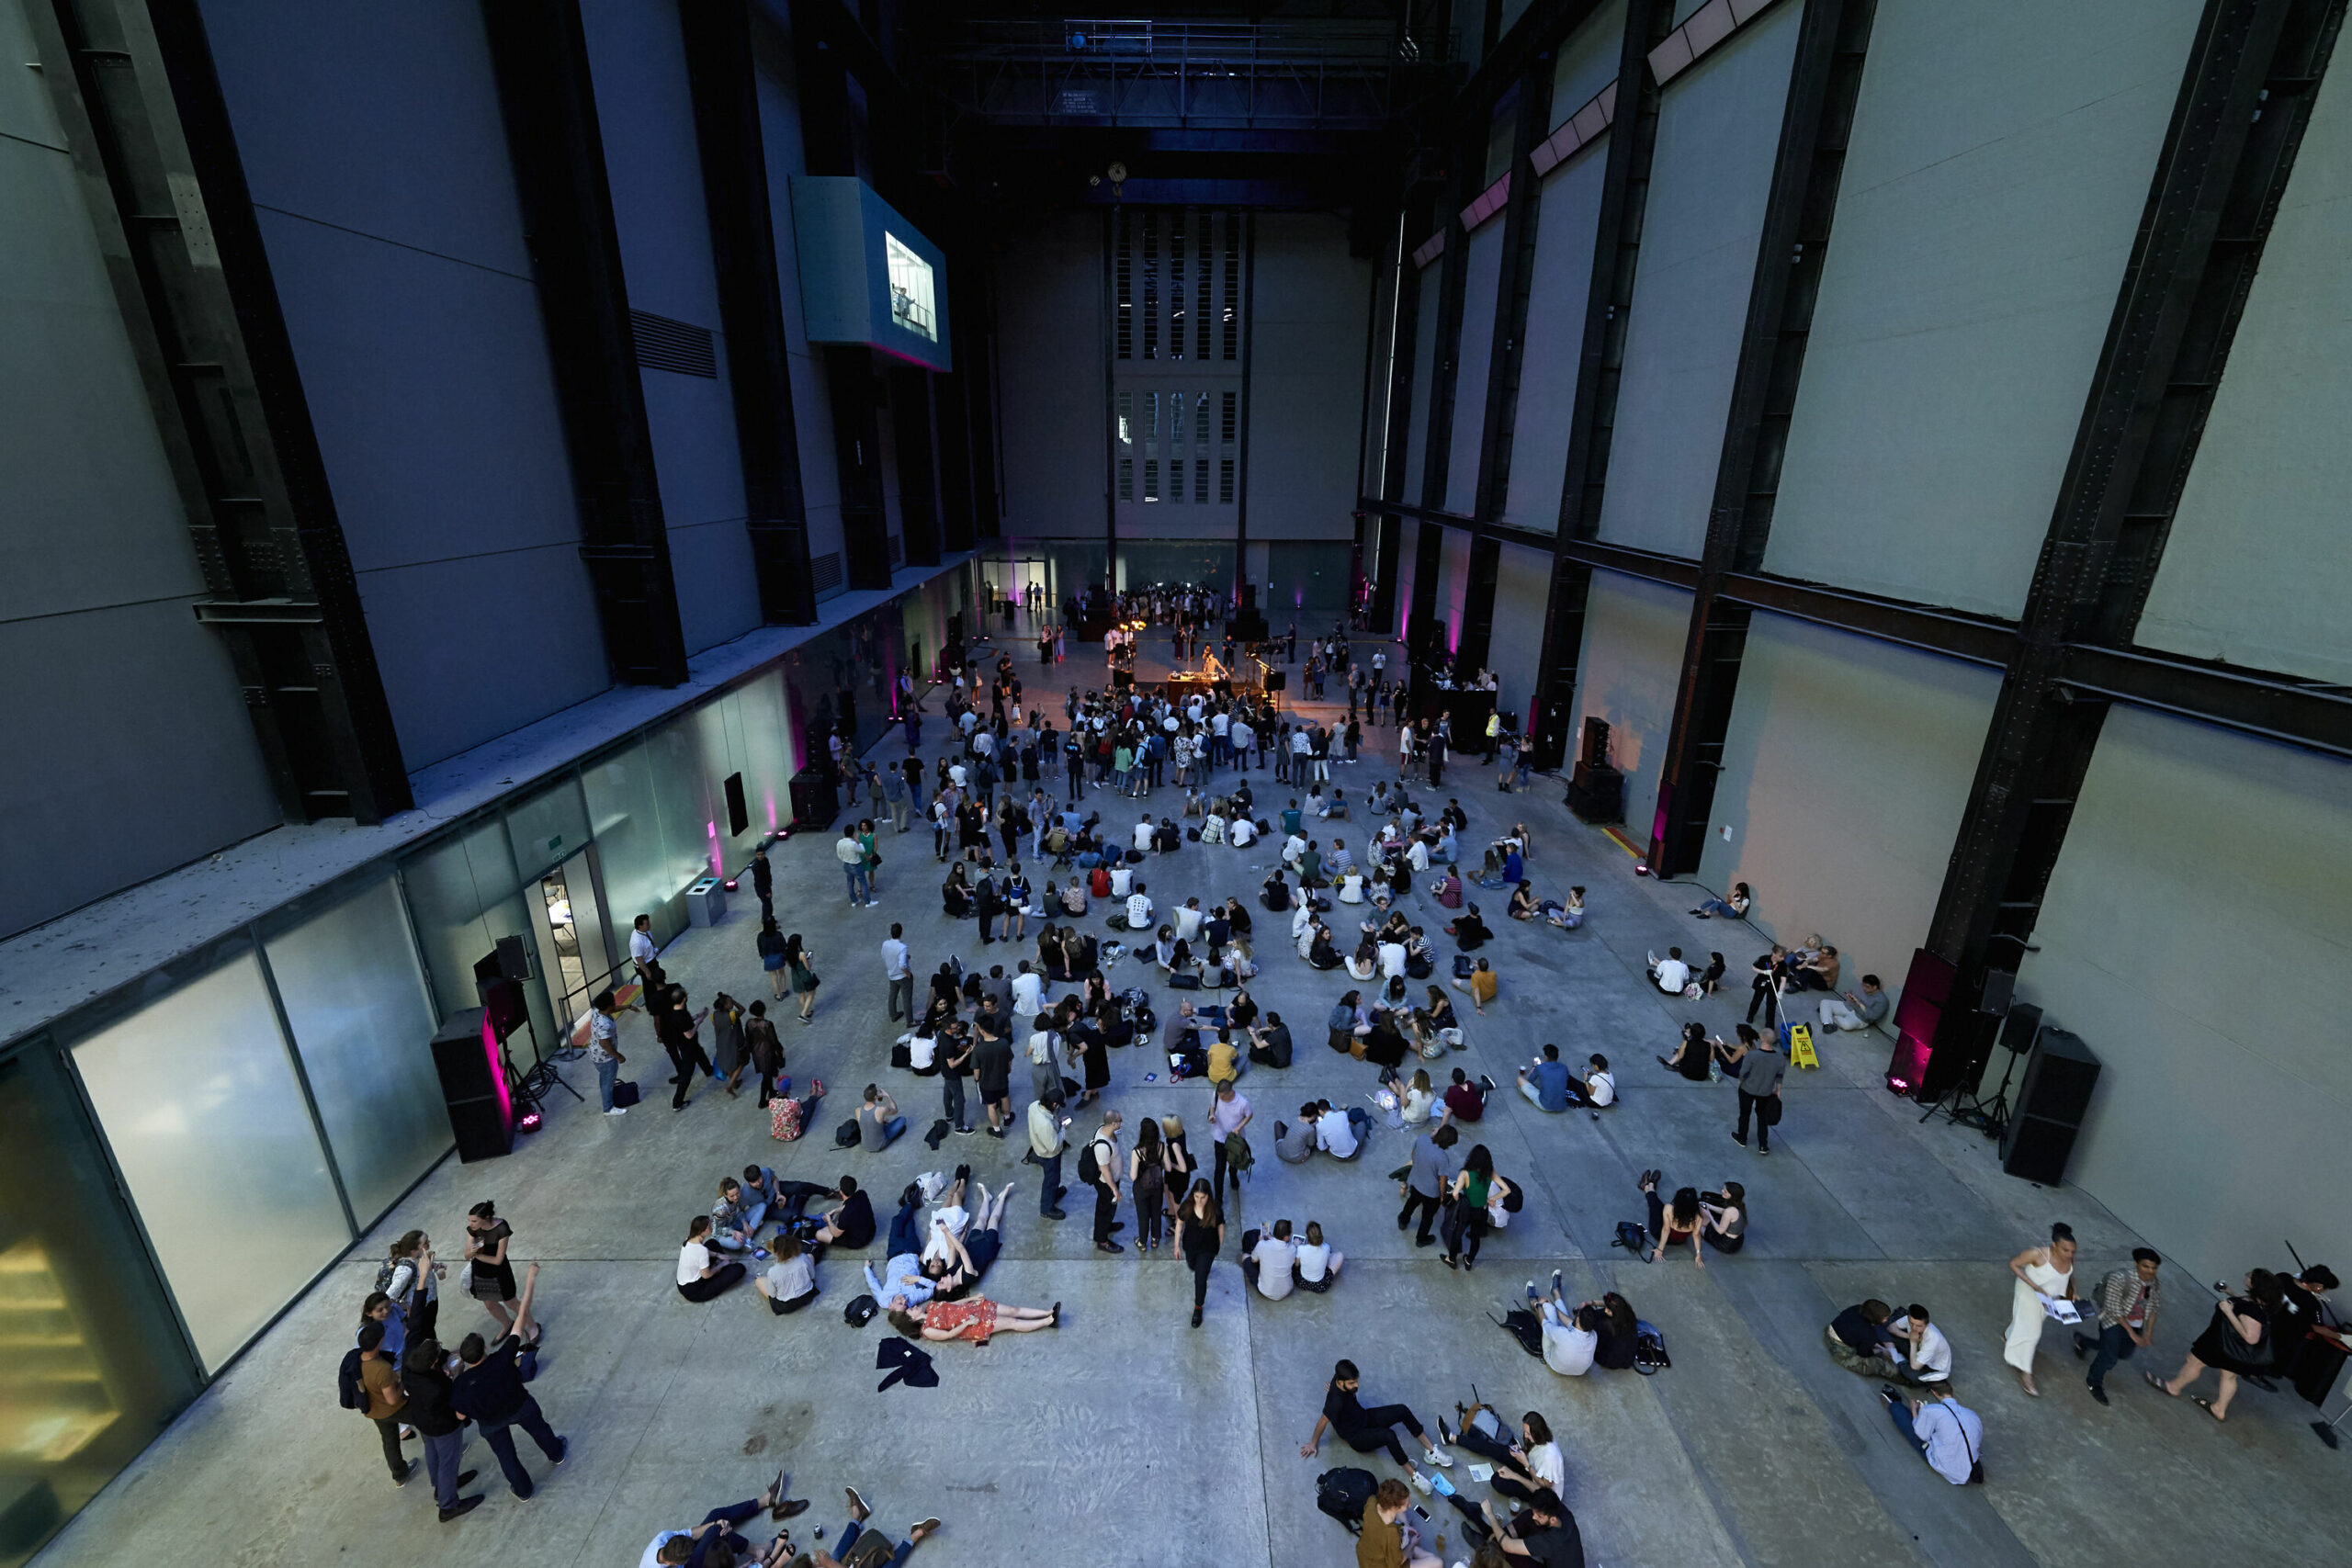 People move through the Tate Modern museum, looking small from this vantage point three stories above them.